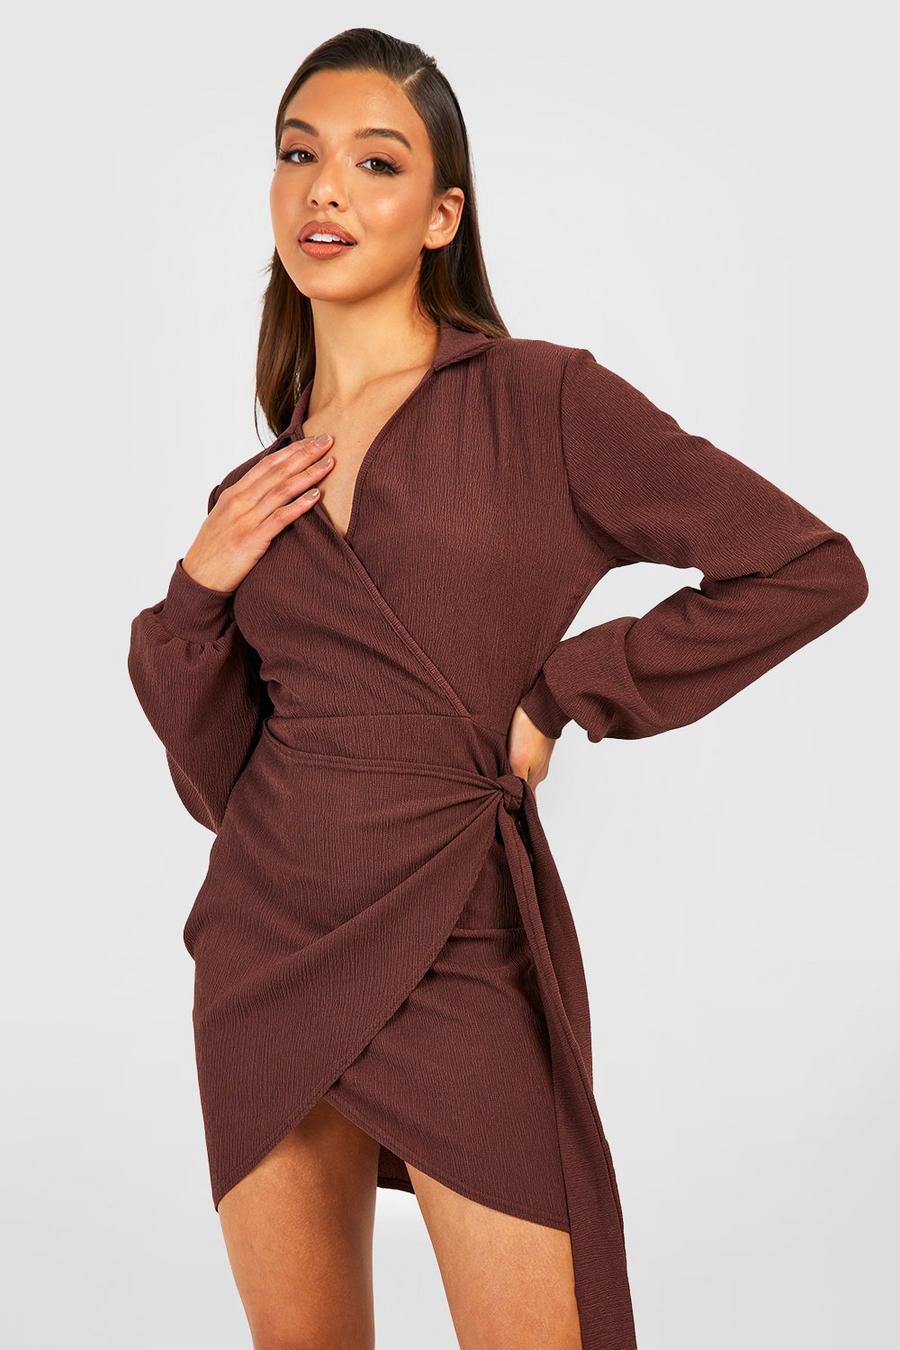 Long Sleeve Dresses, Dresses With Long Sleeves